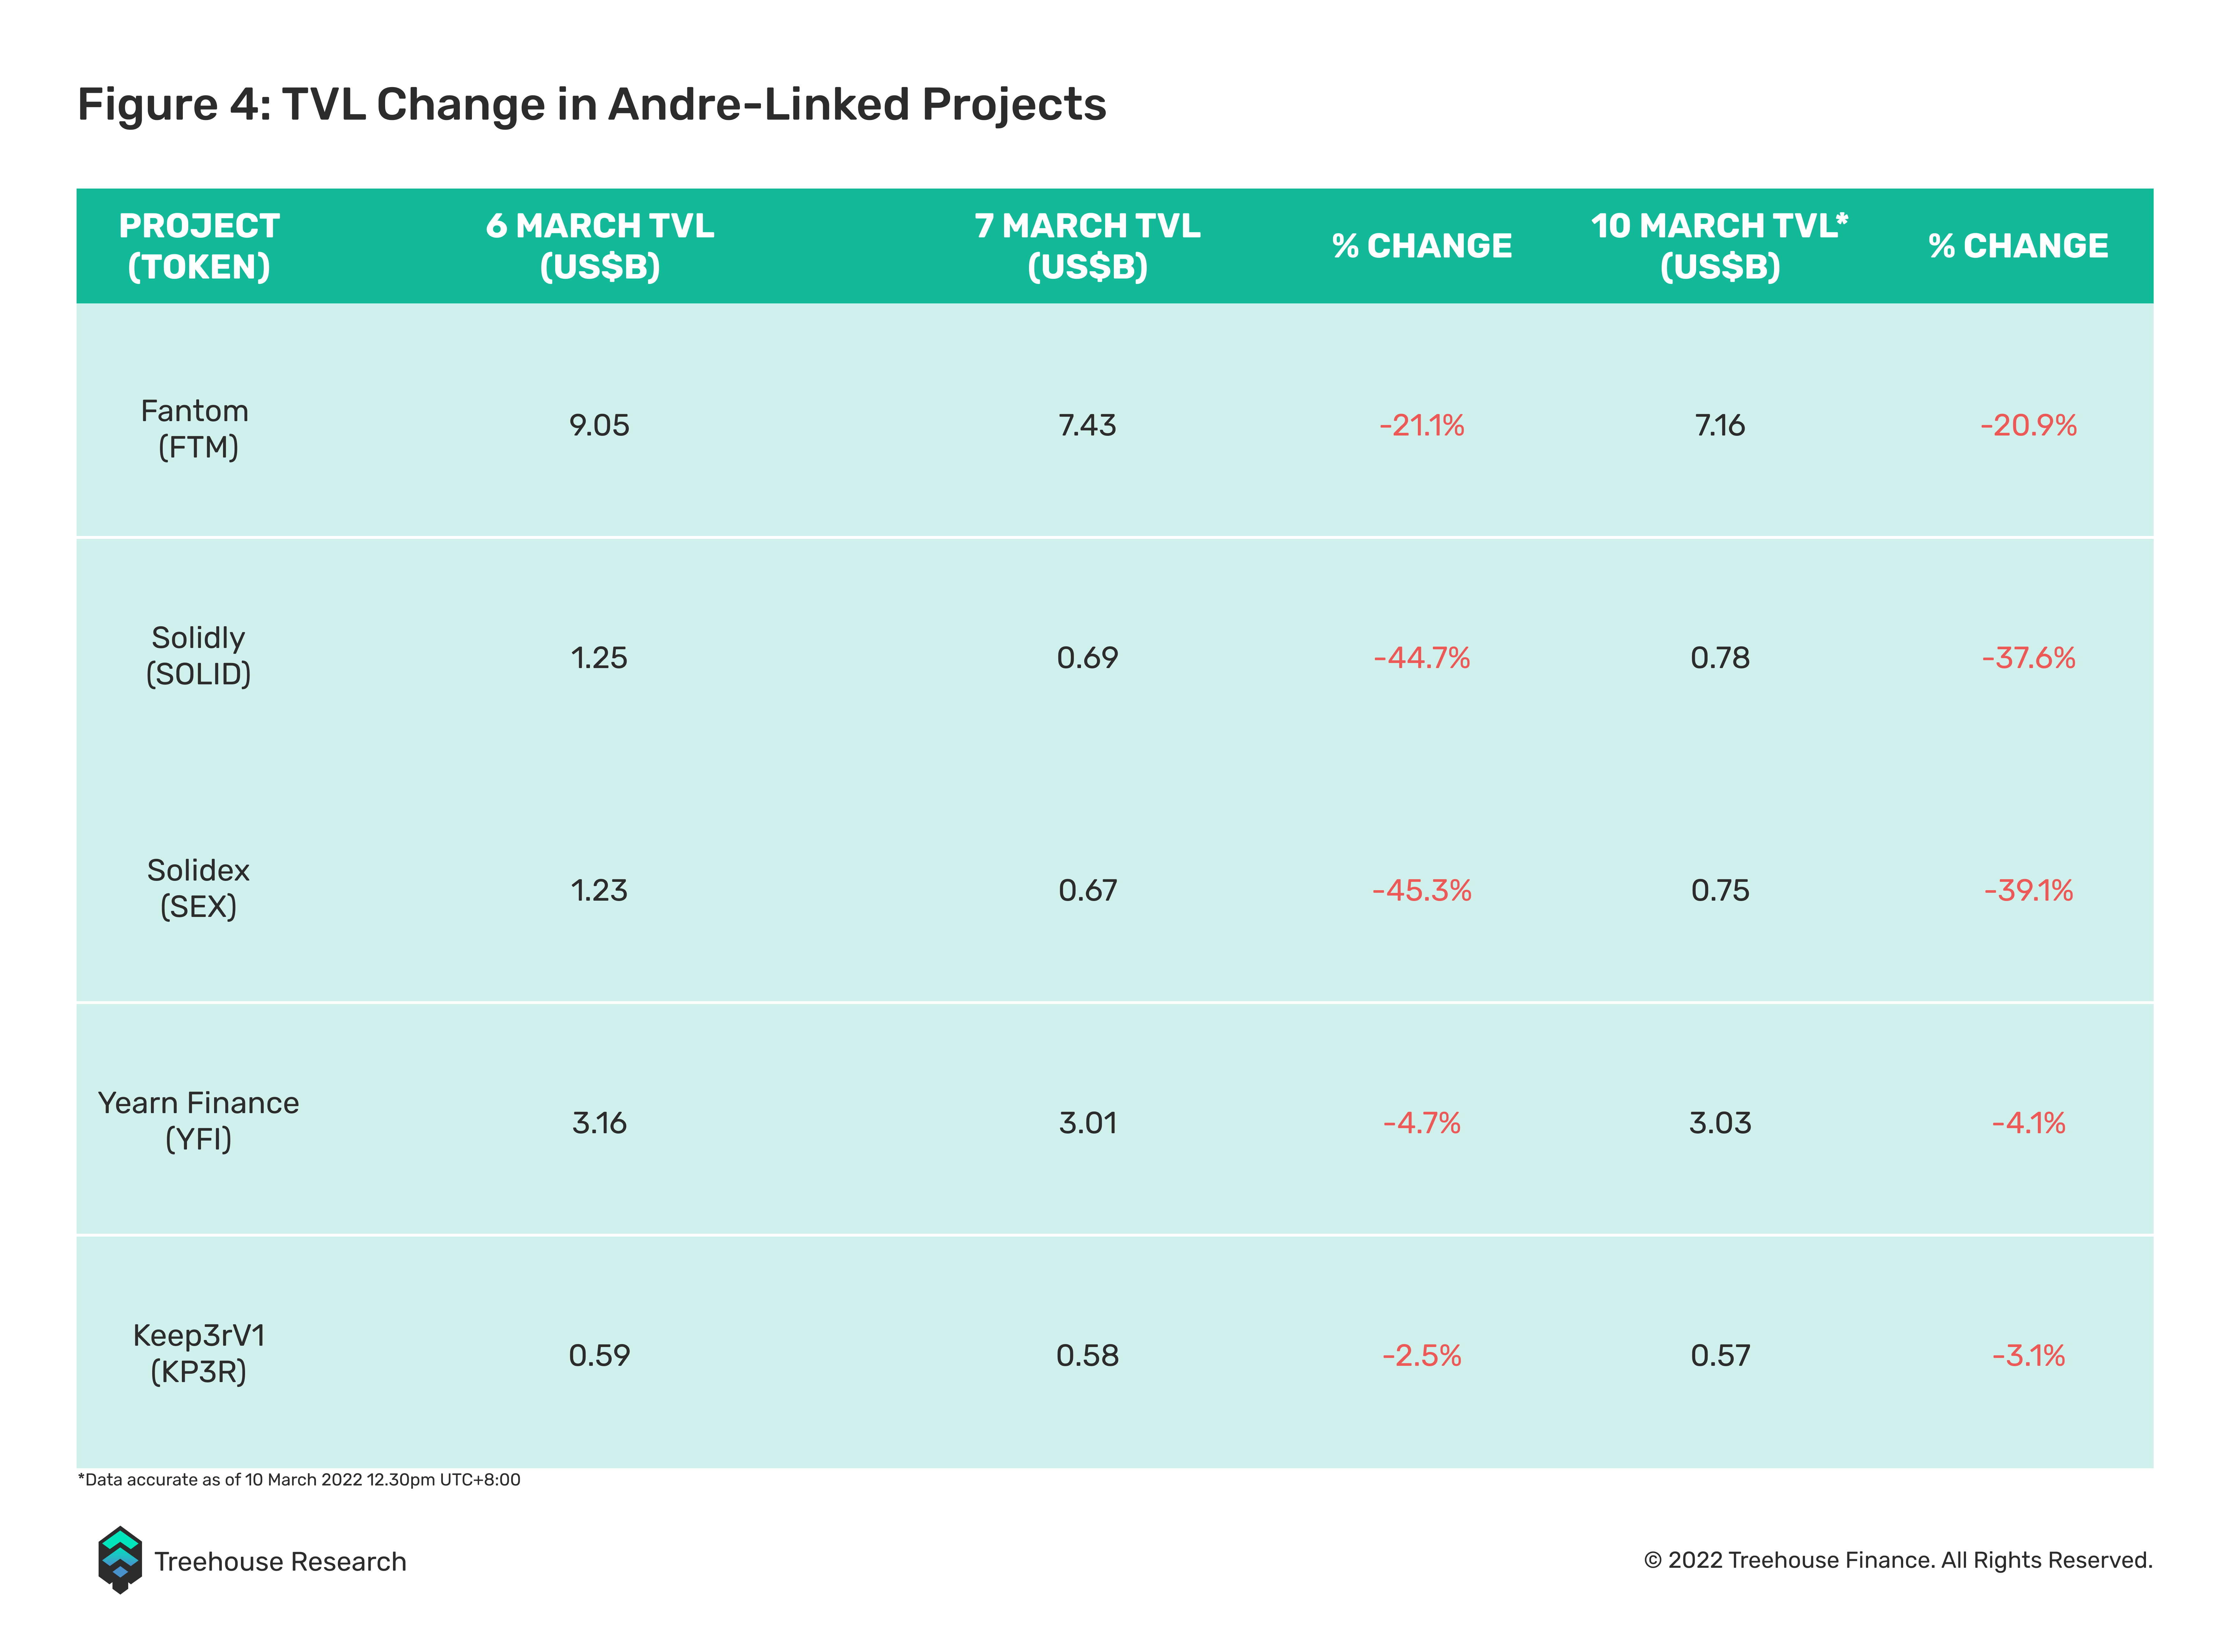 tvl change in andre-linked projects